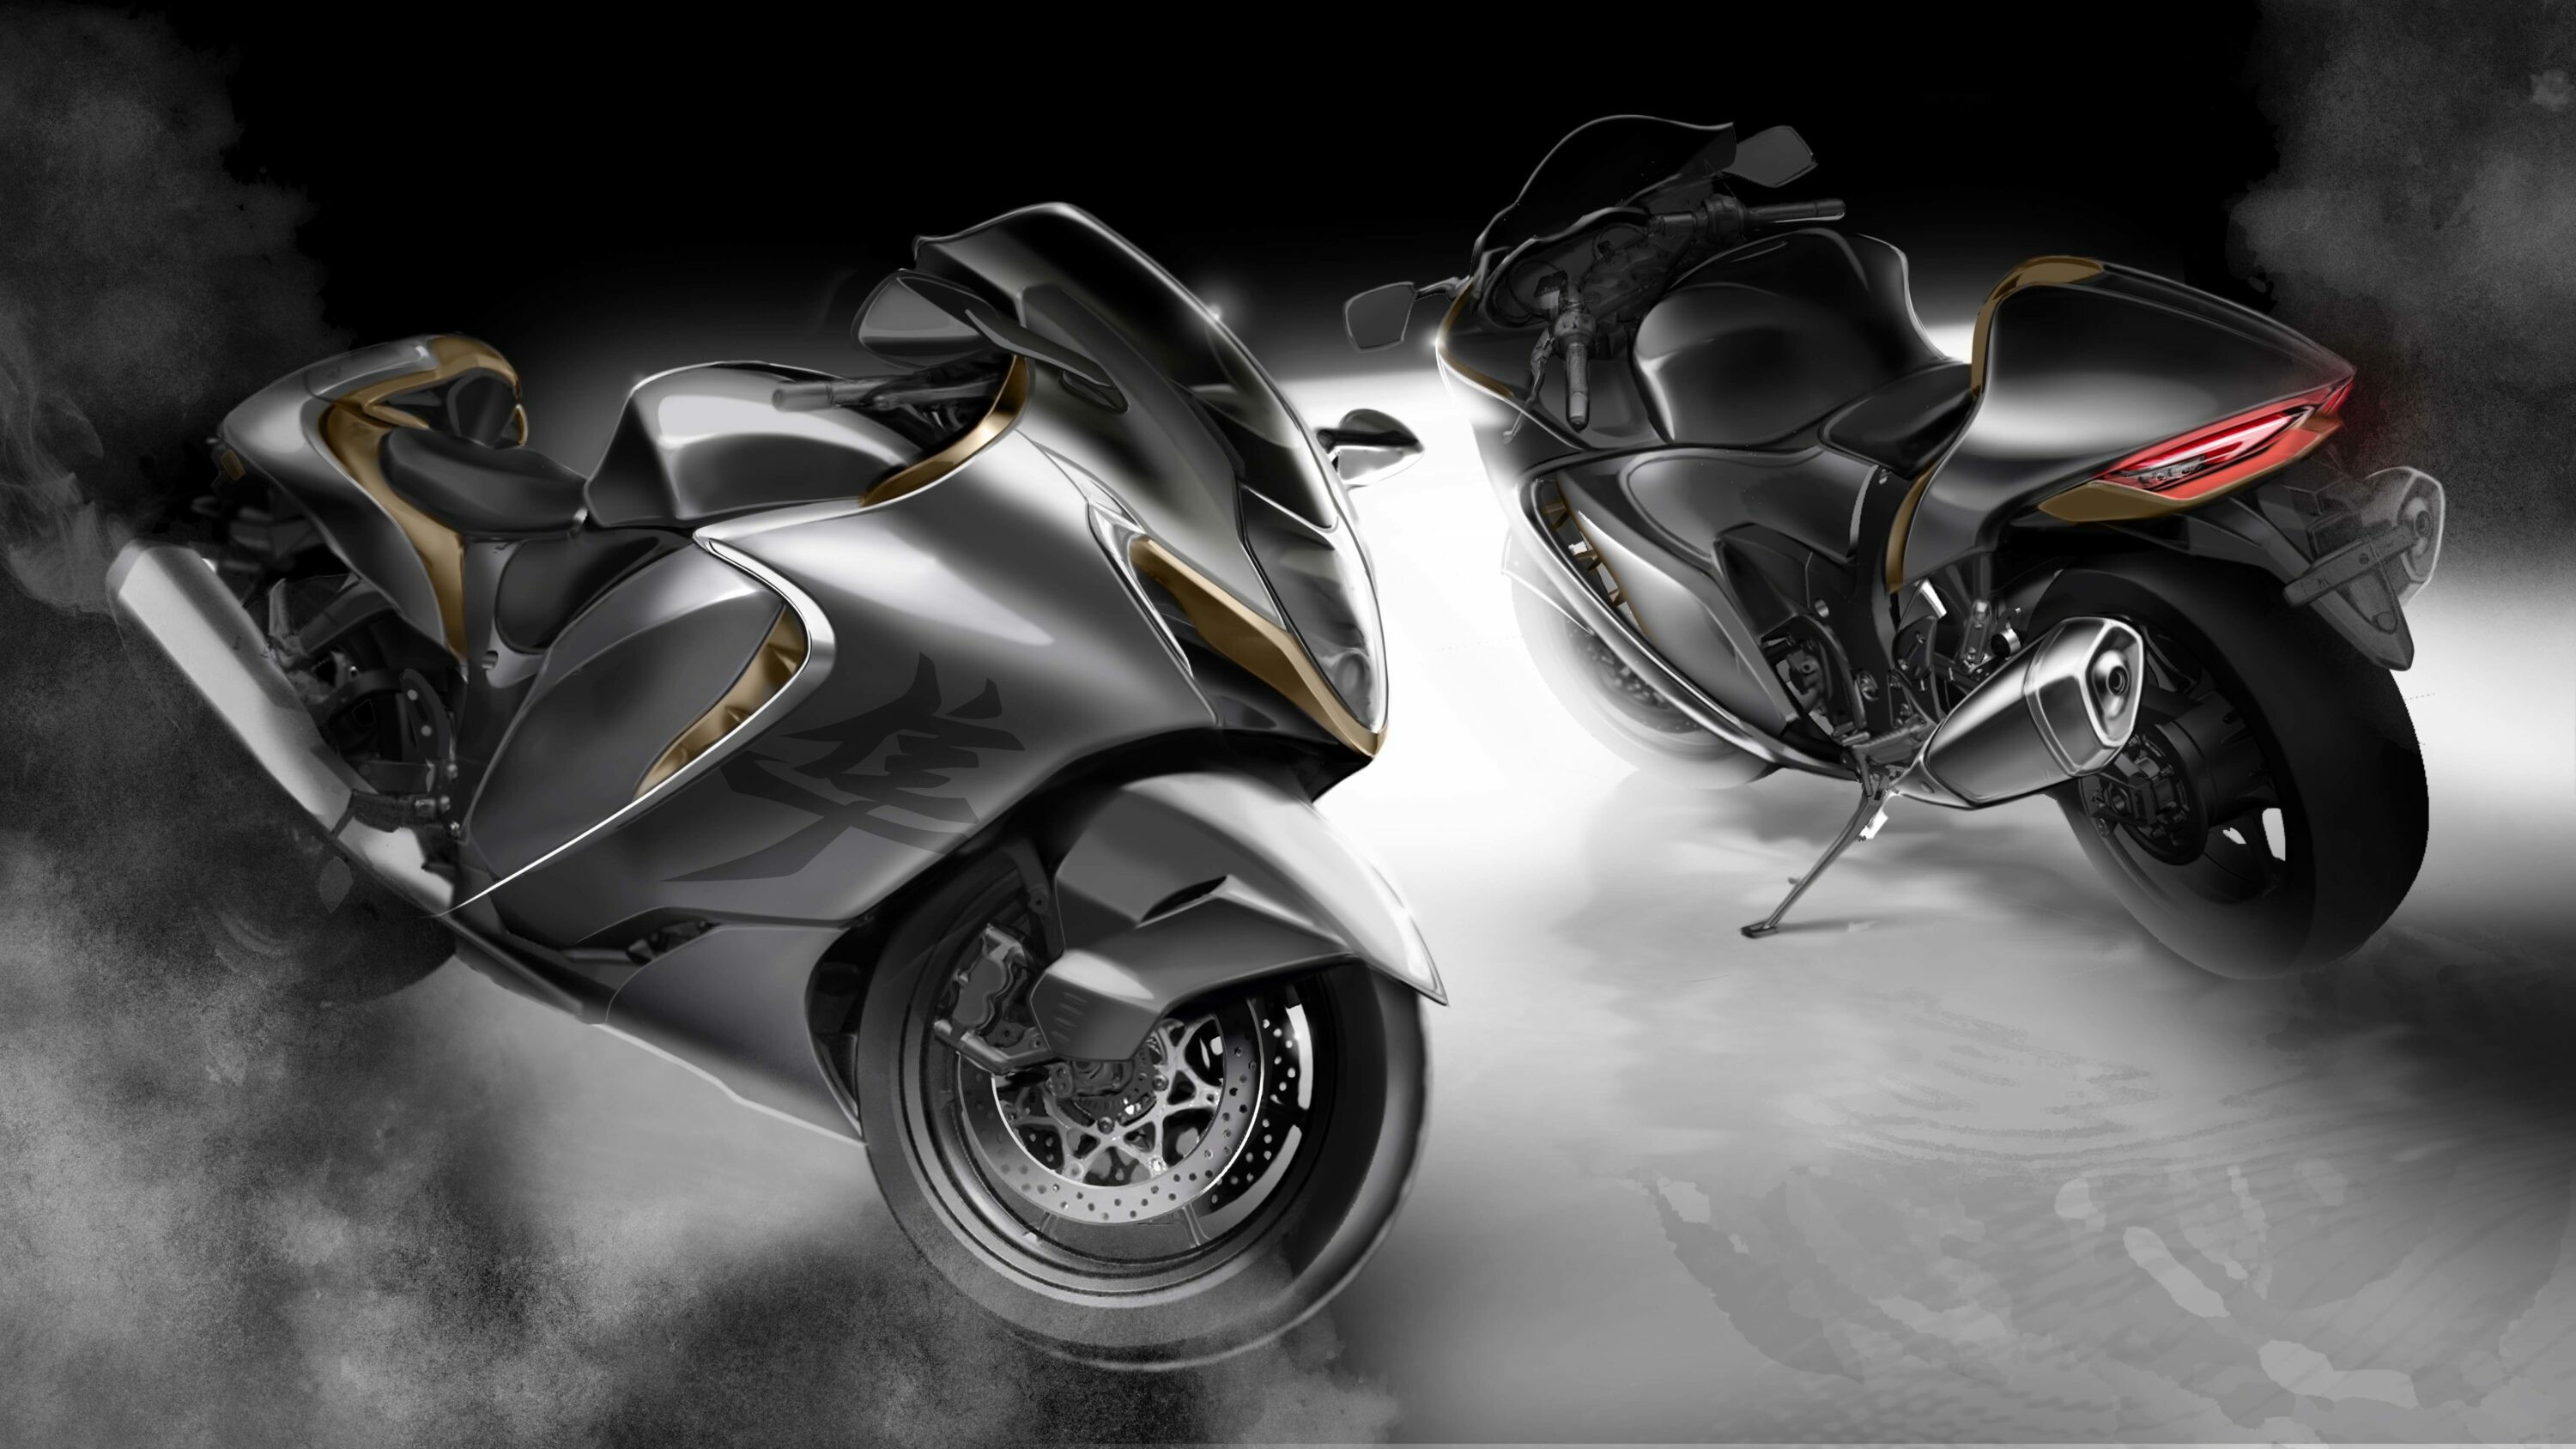 Suzuki Hayabusa: Debuted in 1999, it was the fastest stock motorcycle ever made, with a top speed of 186 mph. 3010x1690 HD Wallpaper.